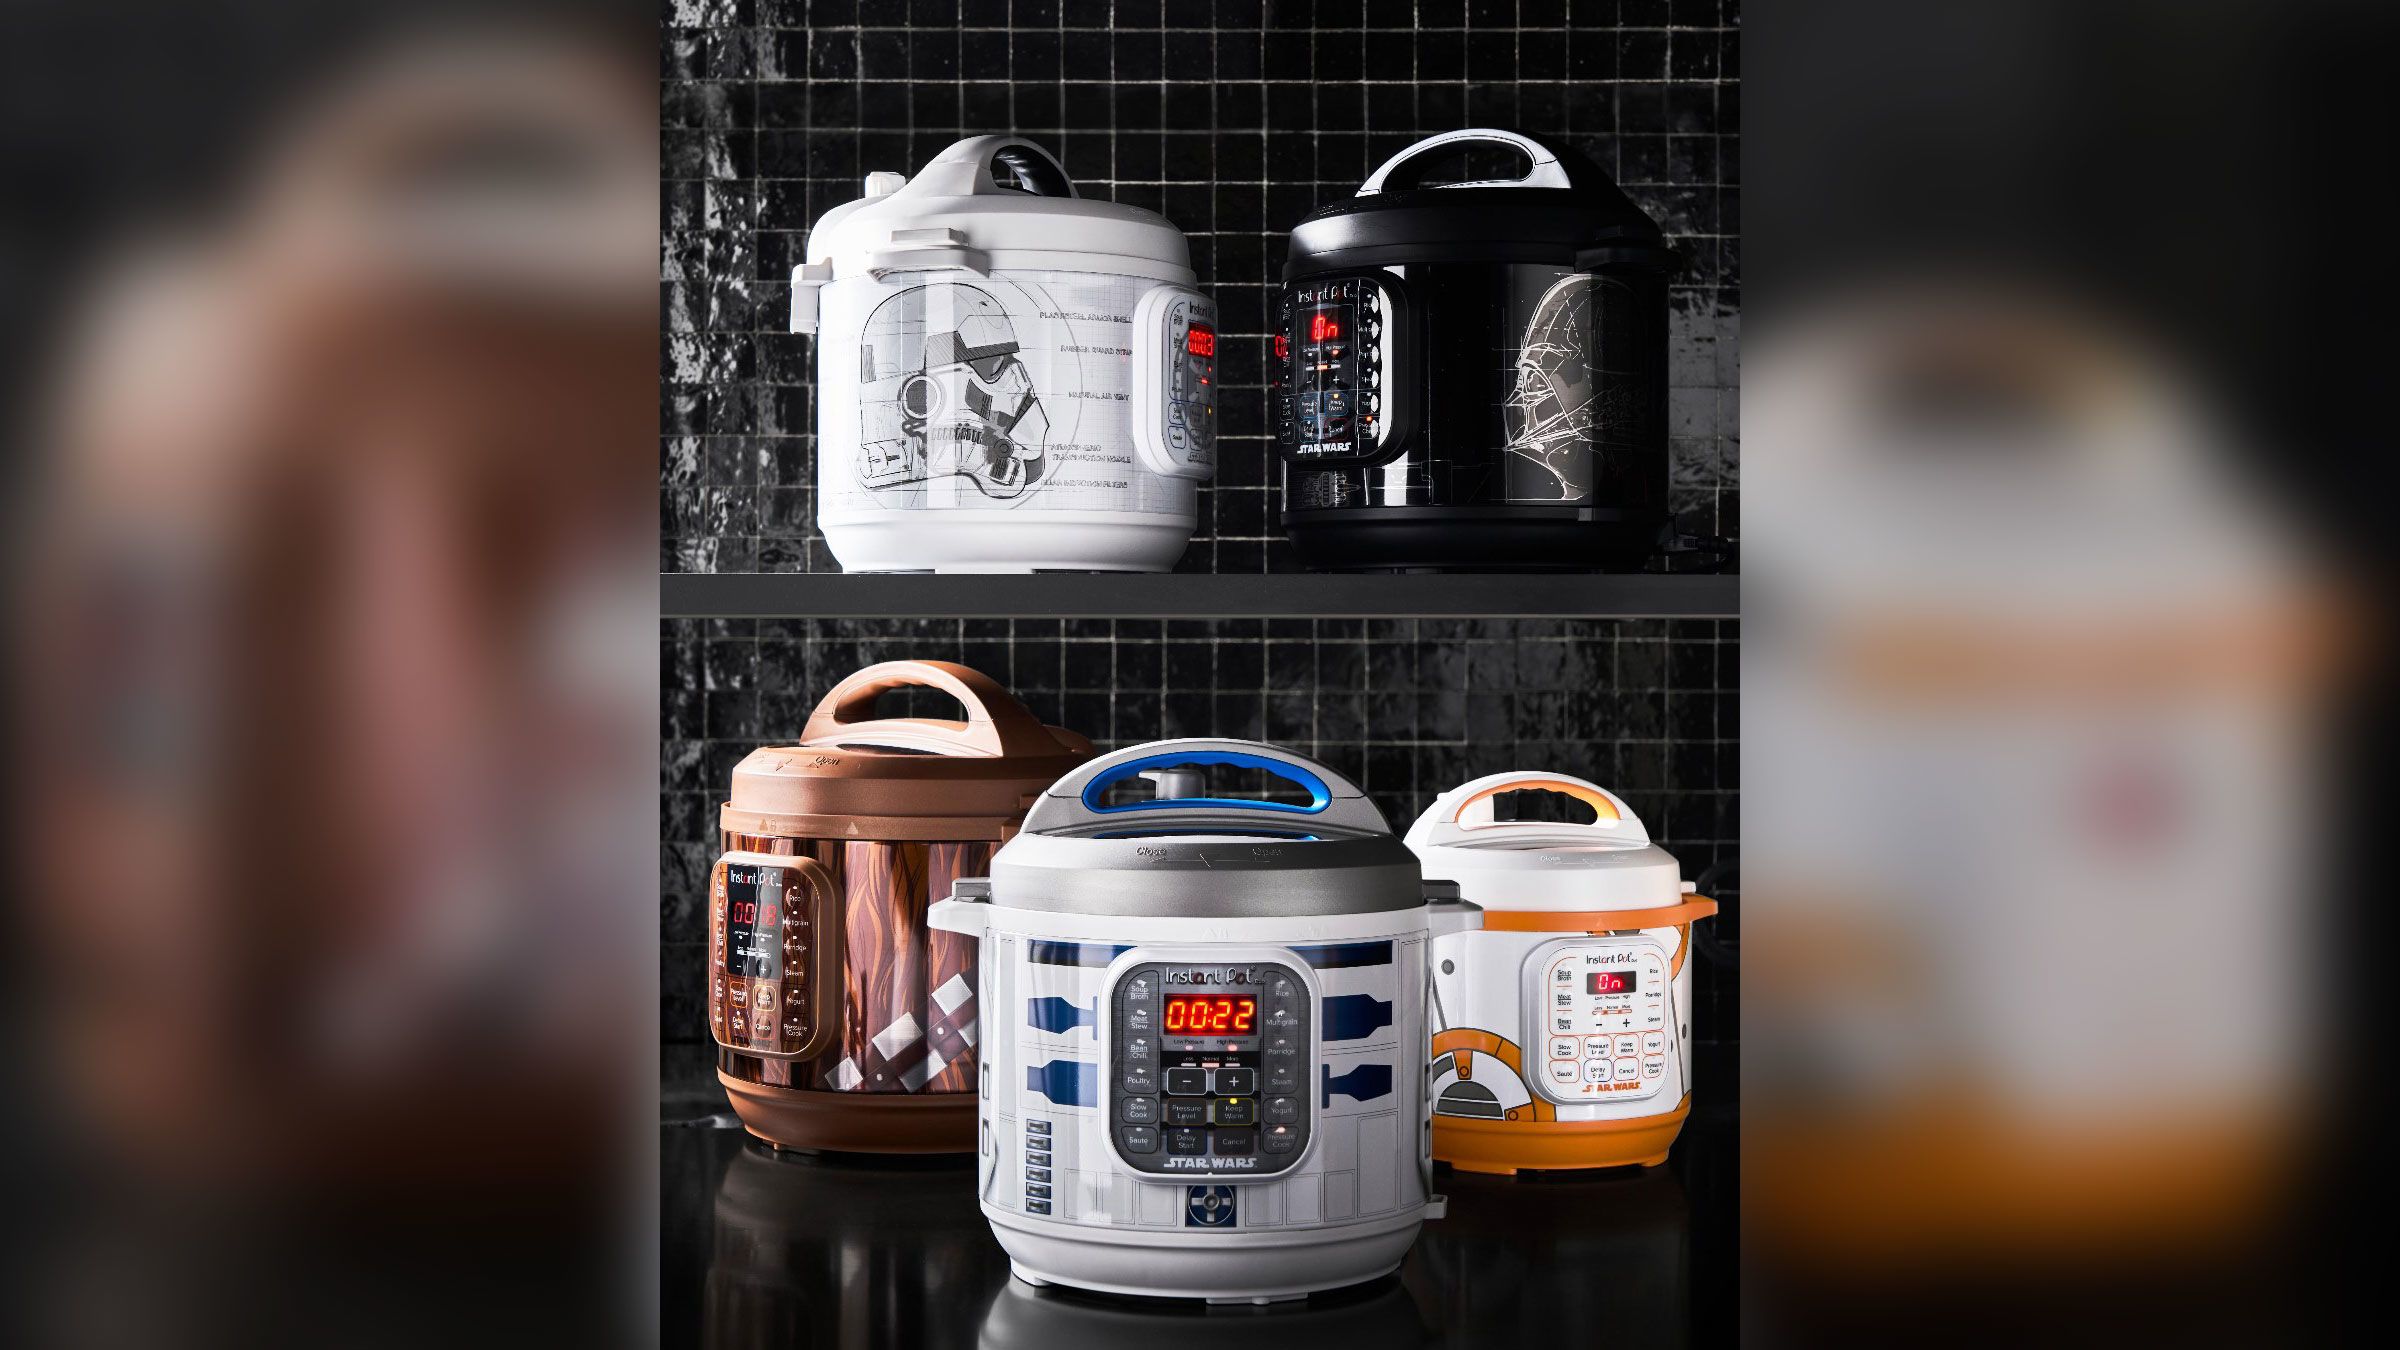 Where to get the Star Wars Instant Pot Collection